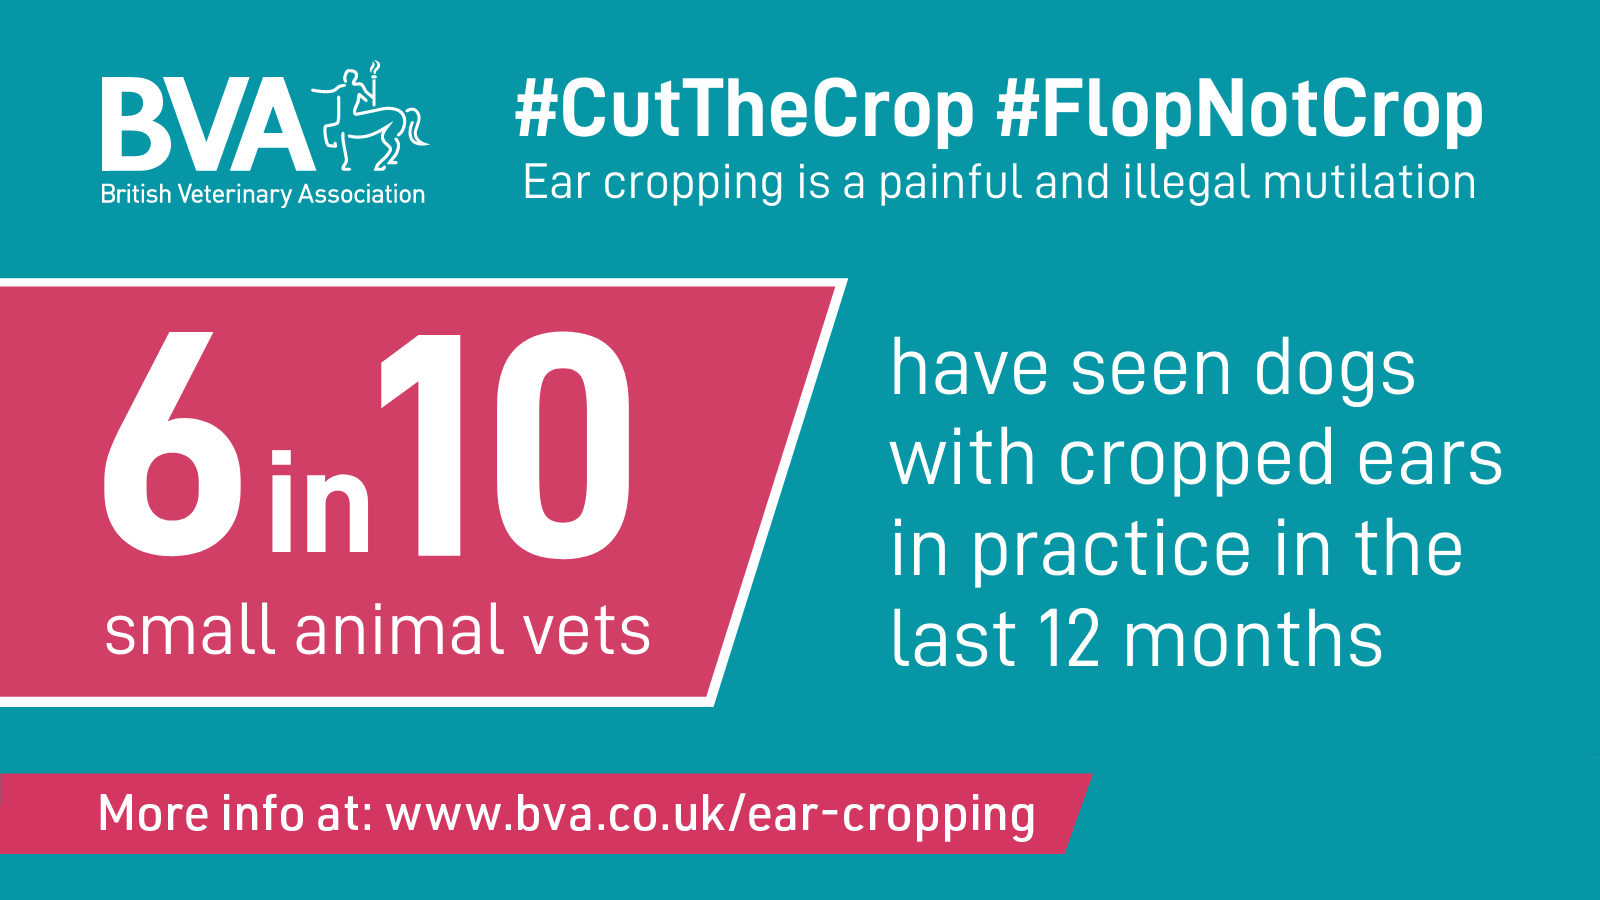 Urgent action is needed, say vets, as new statistics show dogs with illegal cropped ears are becoming more common  Image